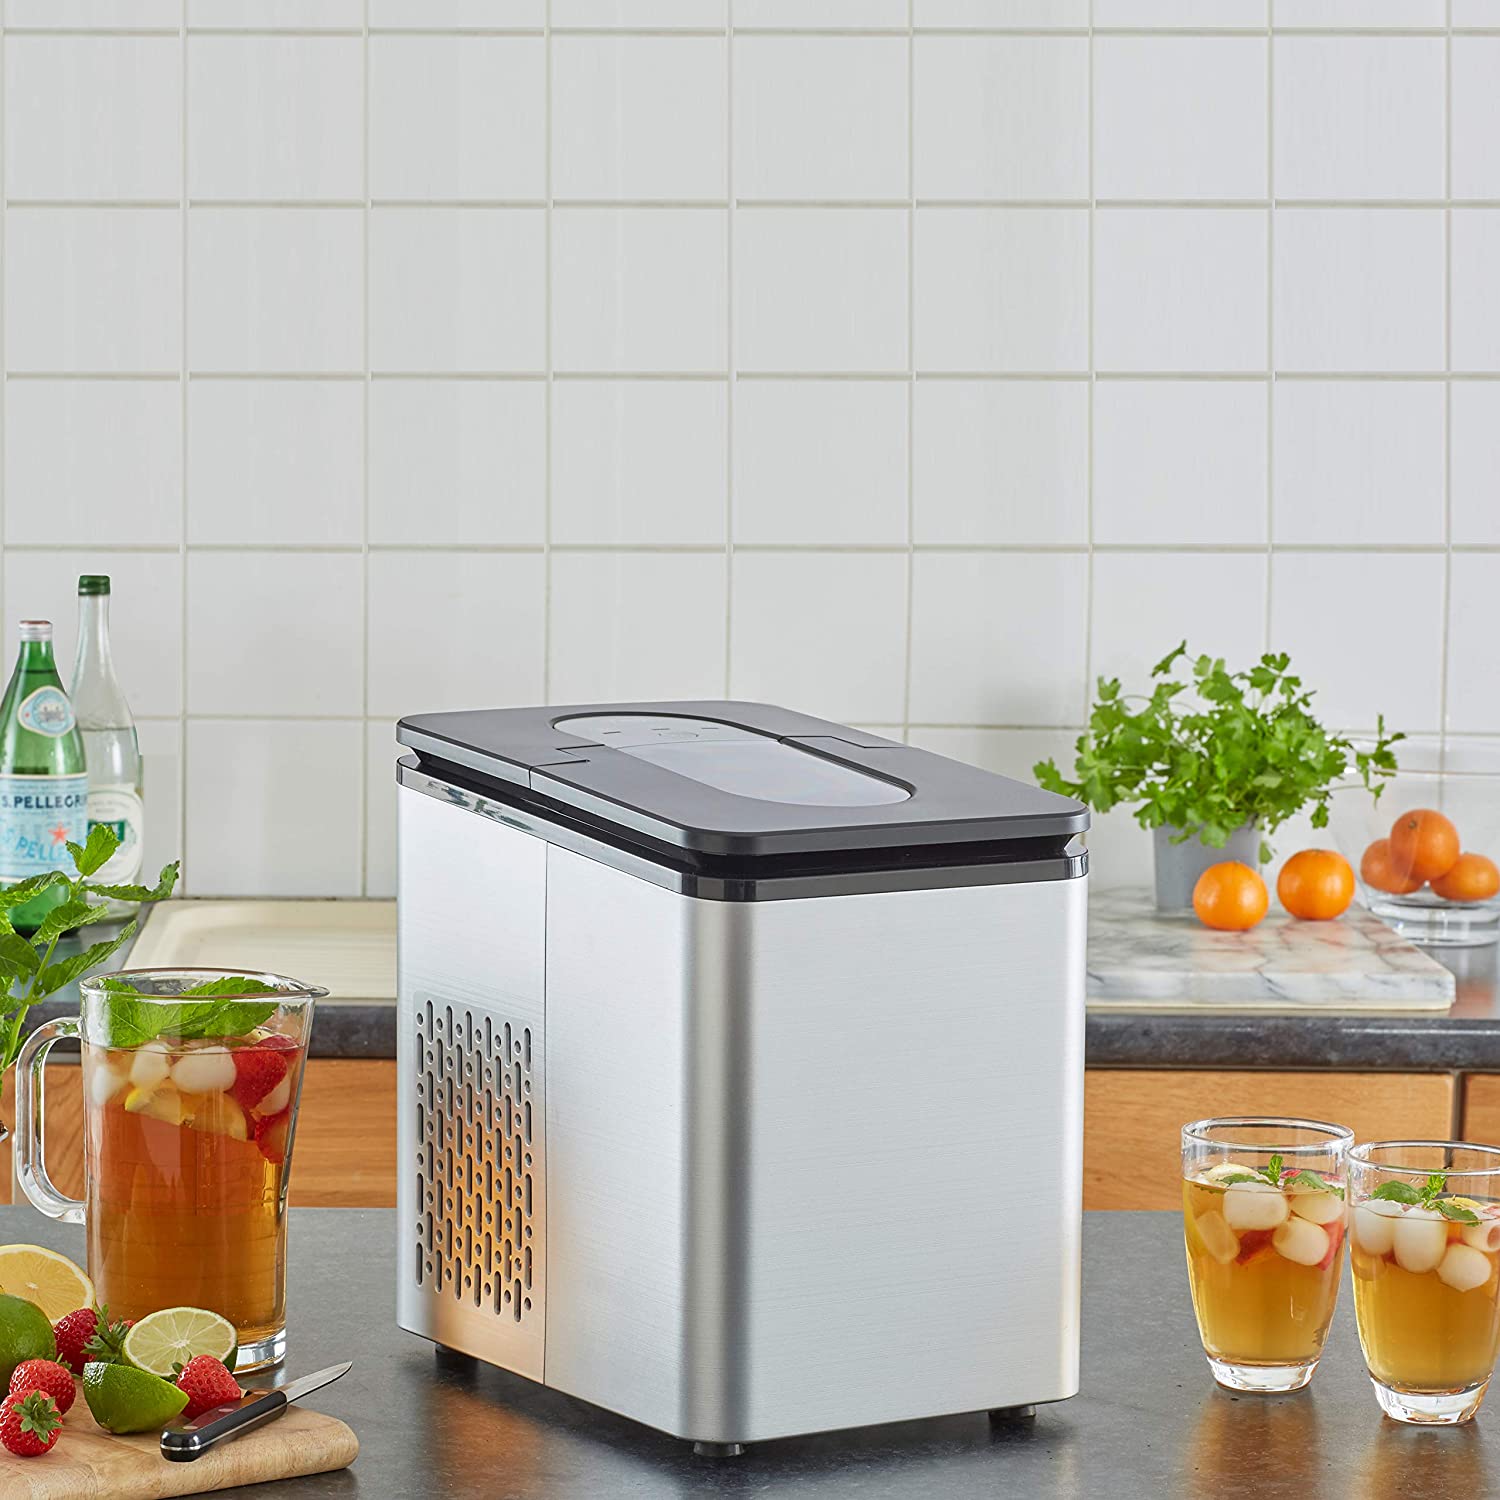 Black chinkyboo New super smart ice maker Electrical Ice Cube Maker Machine Home Bar Office Cocktails ice Machine Drinks Top Counter Ice Machine 